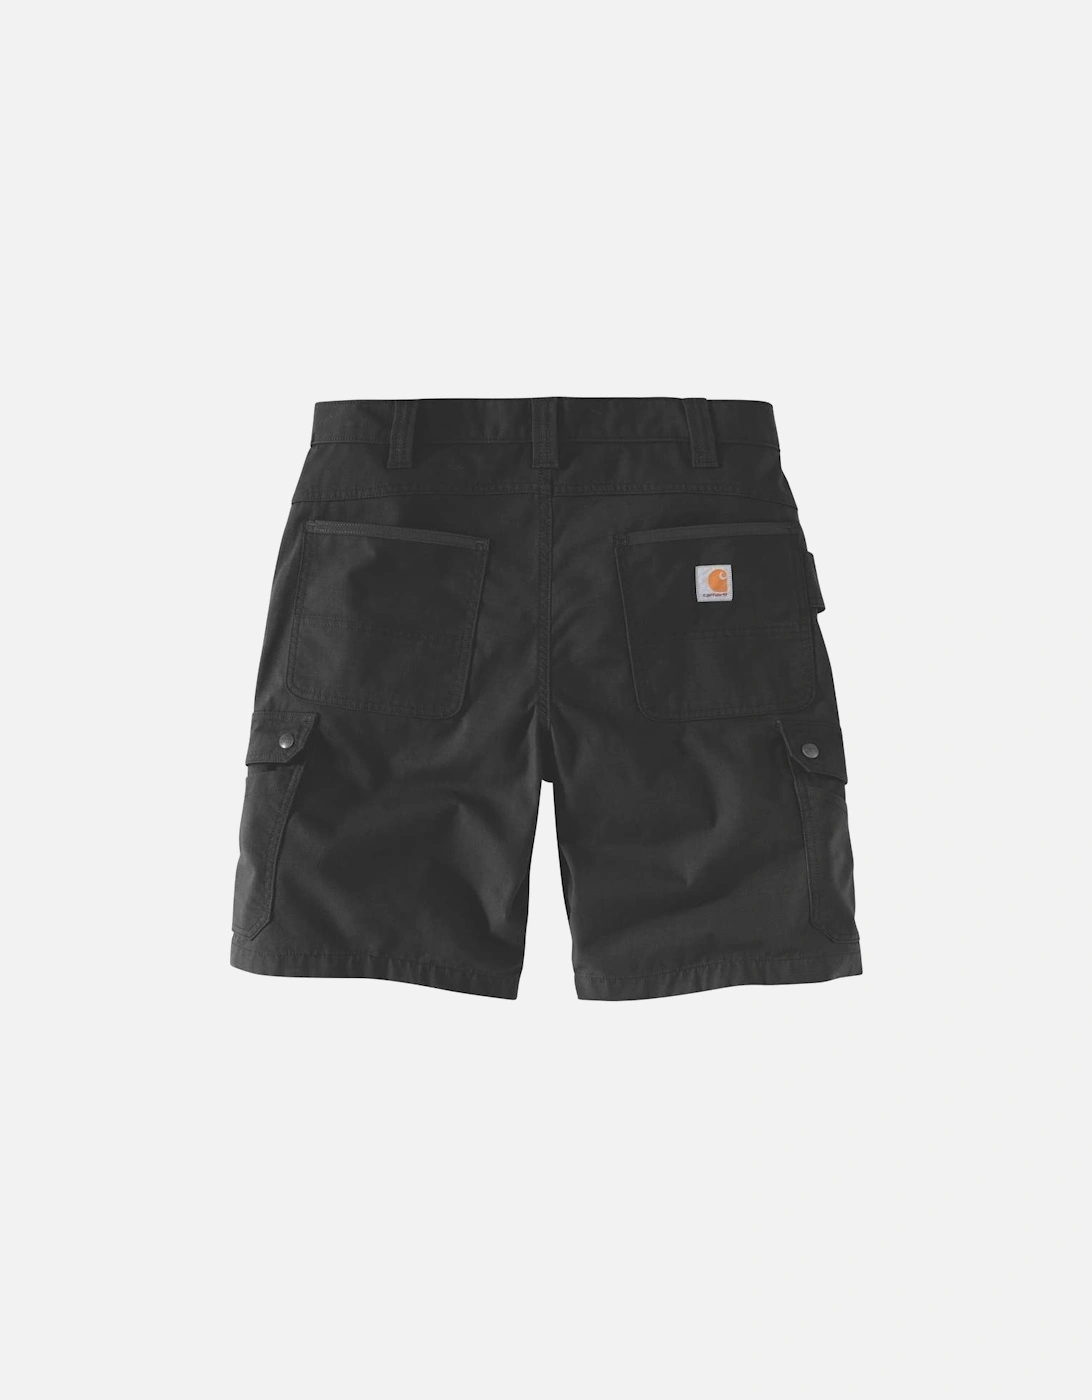 Carhartt Mens Ripstop Relaxed Fit Cargo Work Shorts